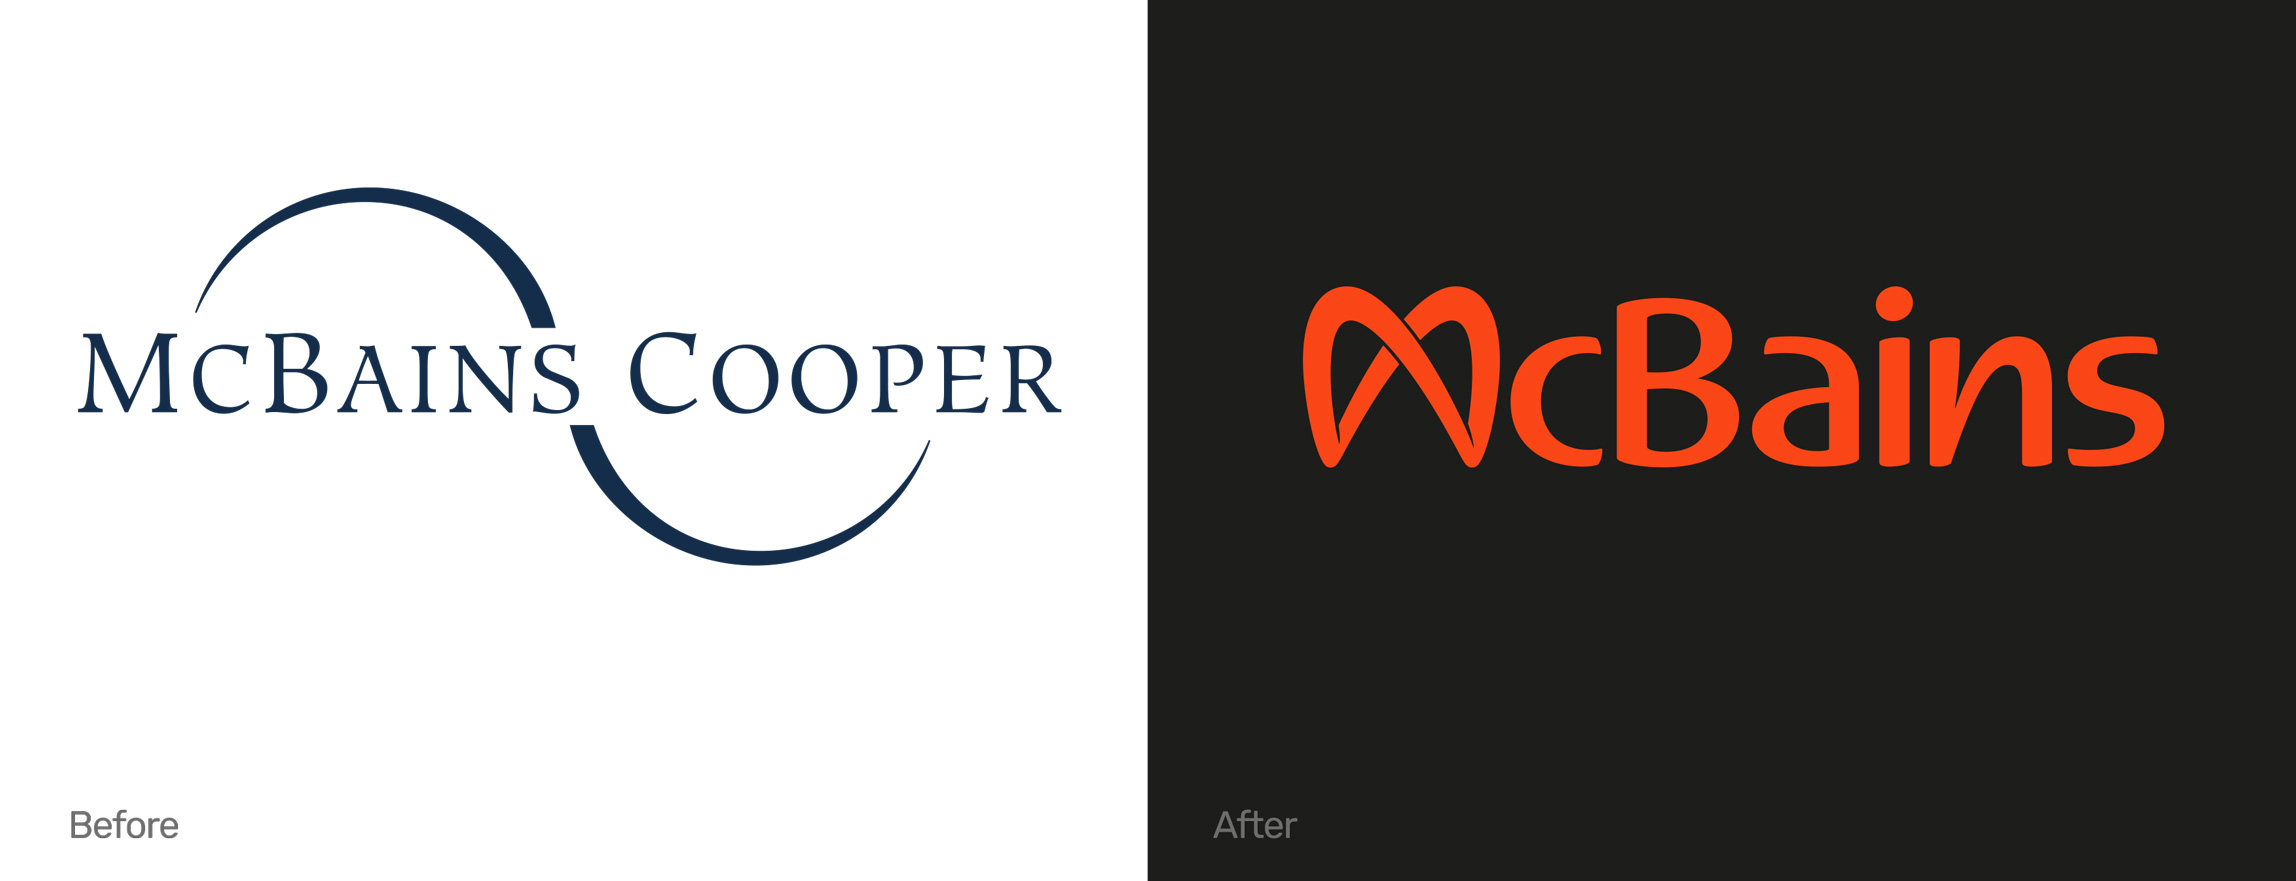 McBains Cooper rebrand before and after